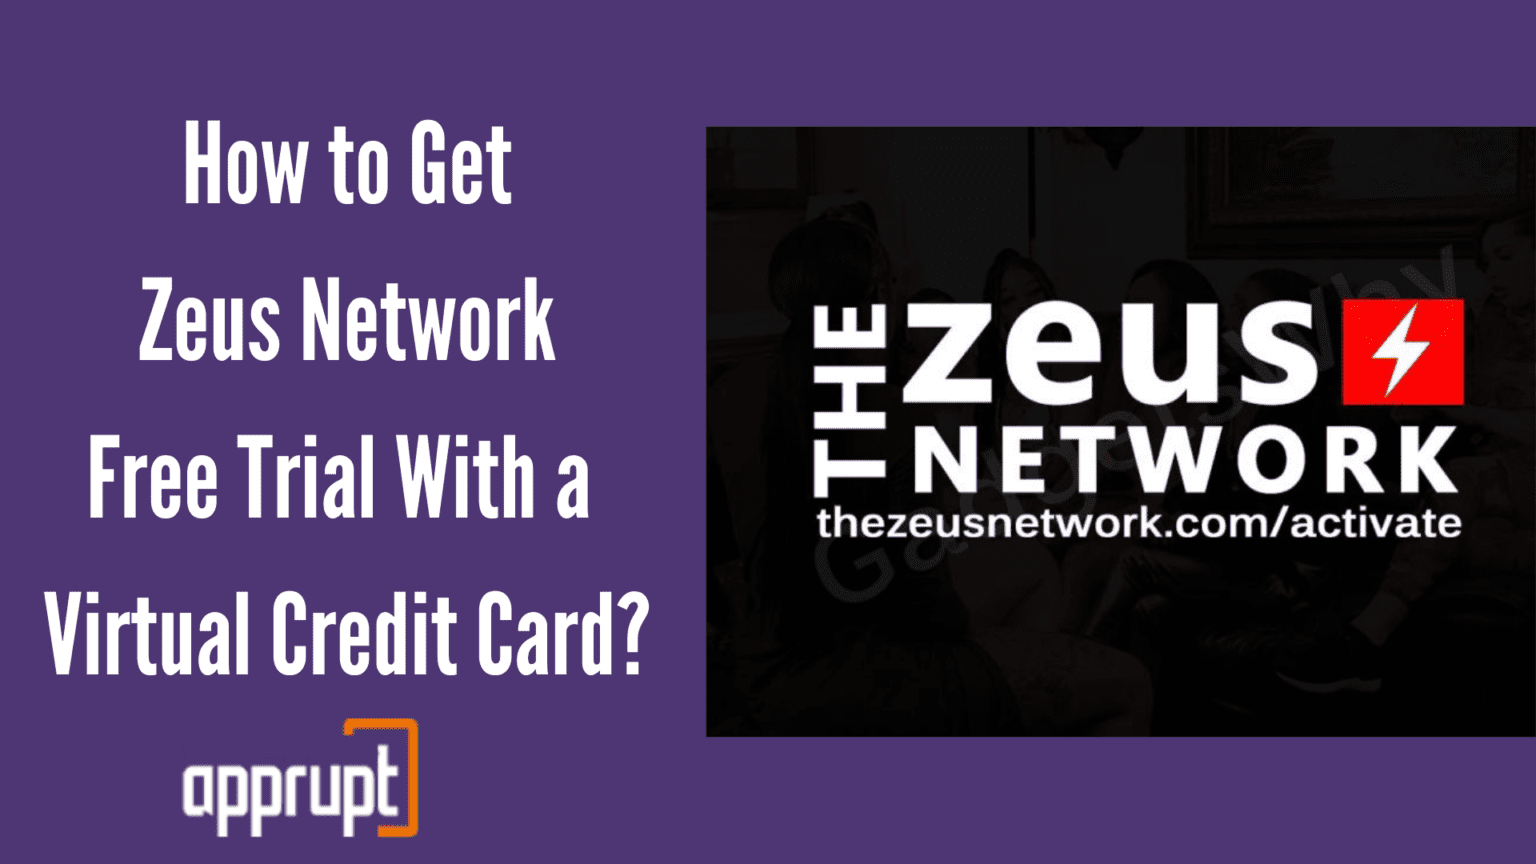 How to Get Zeus Network Free Trial With a Virtual Credit Card